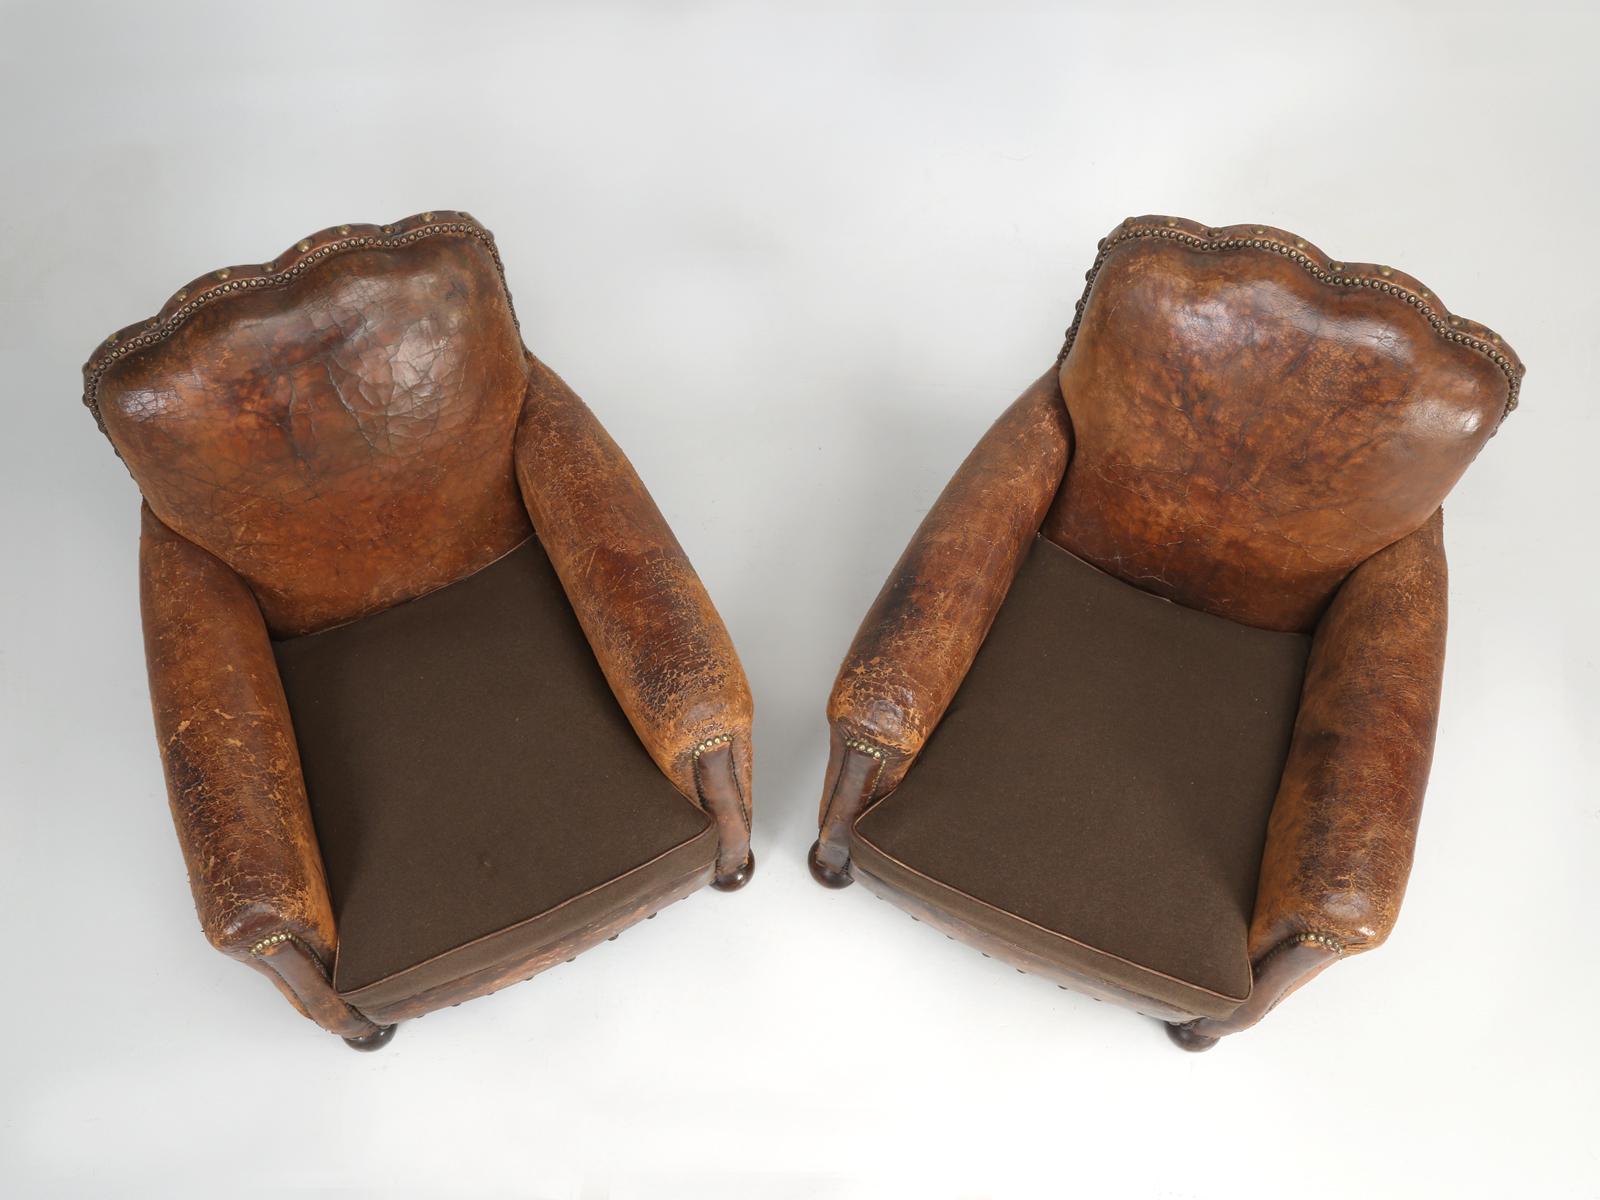 Art Deco Antique Pair of French Leather Club Chairs from the 1920s Extensively Restored